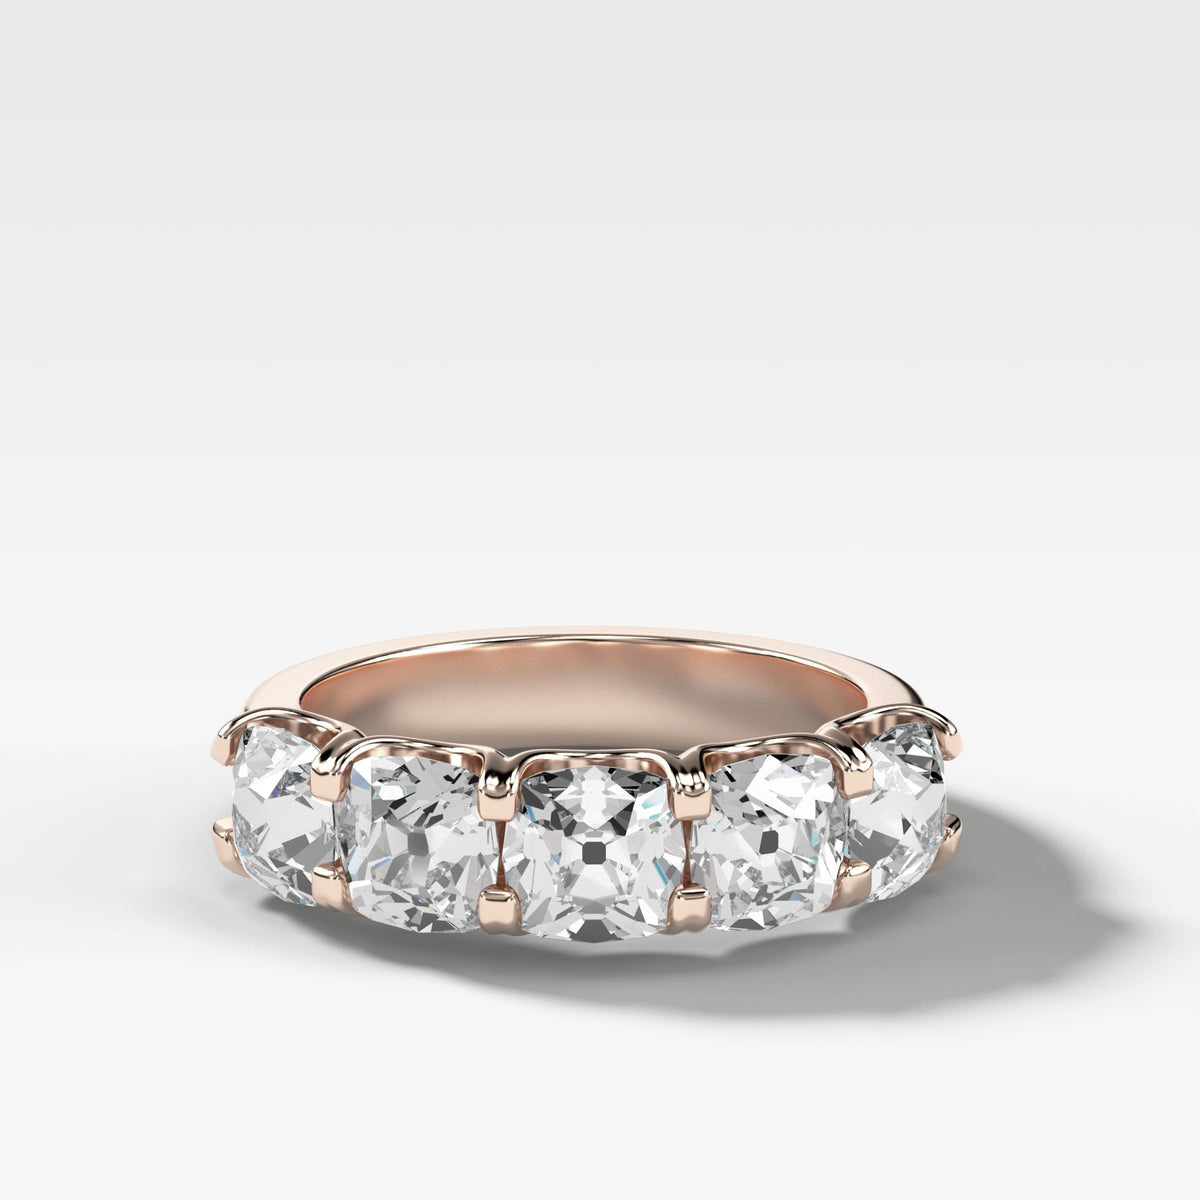 Five Stone Shared Prong Diamond Band With Old Mine Cuts (2.75ctw) by Good Stone in Rose Gold